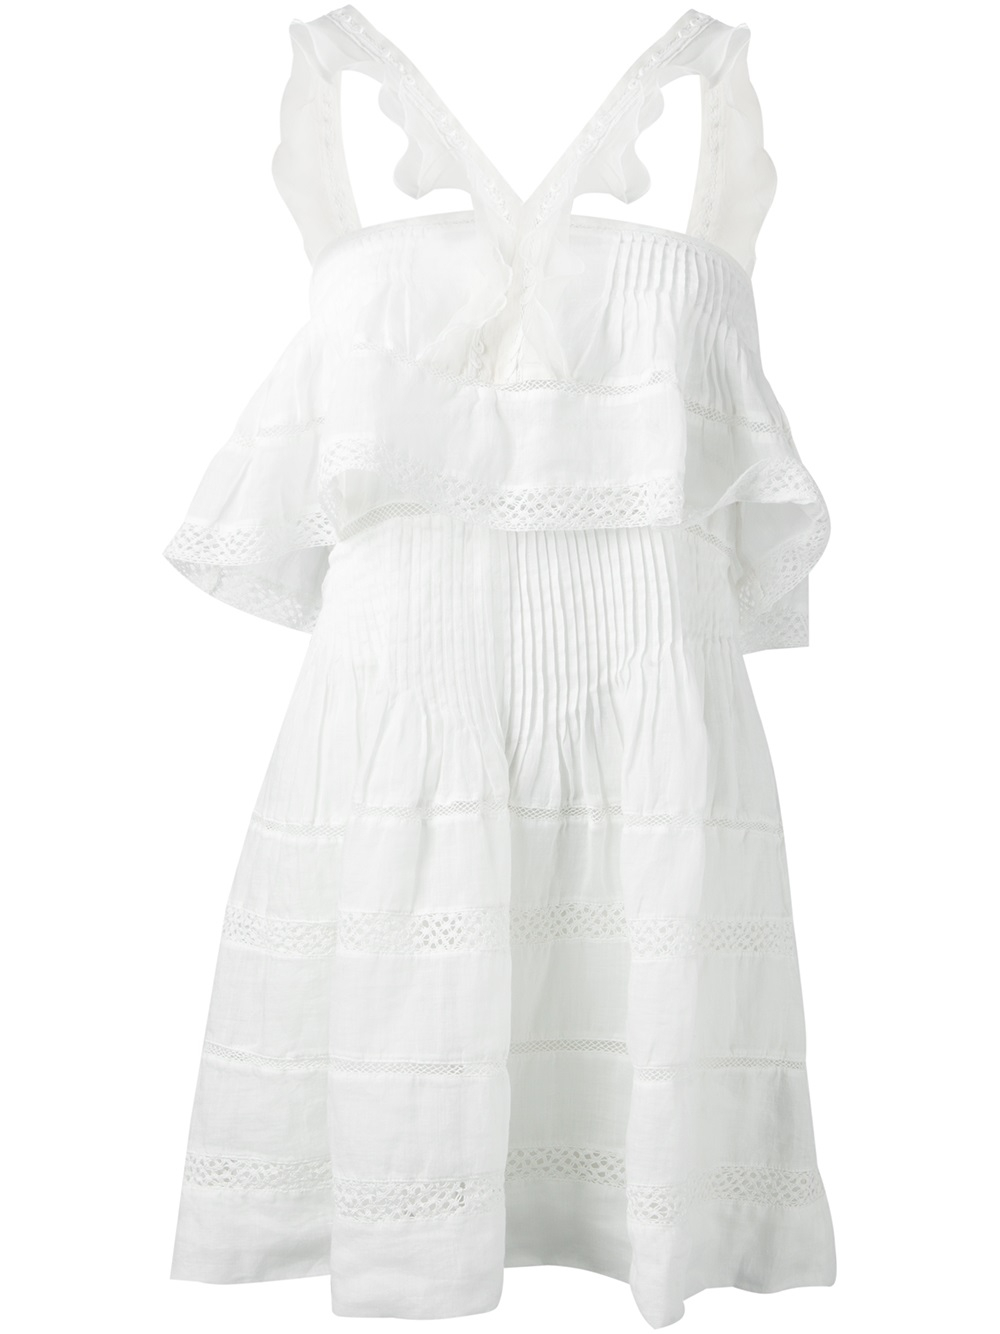 Isabel Marant Embroidered Dress in White | Lyst